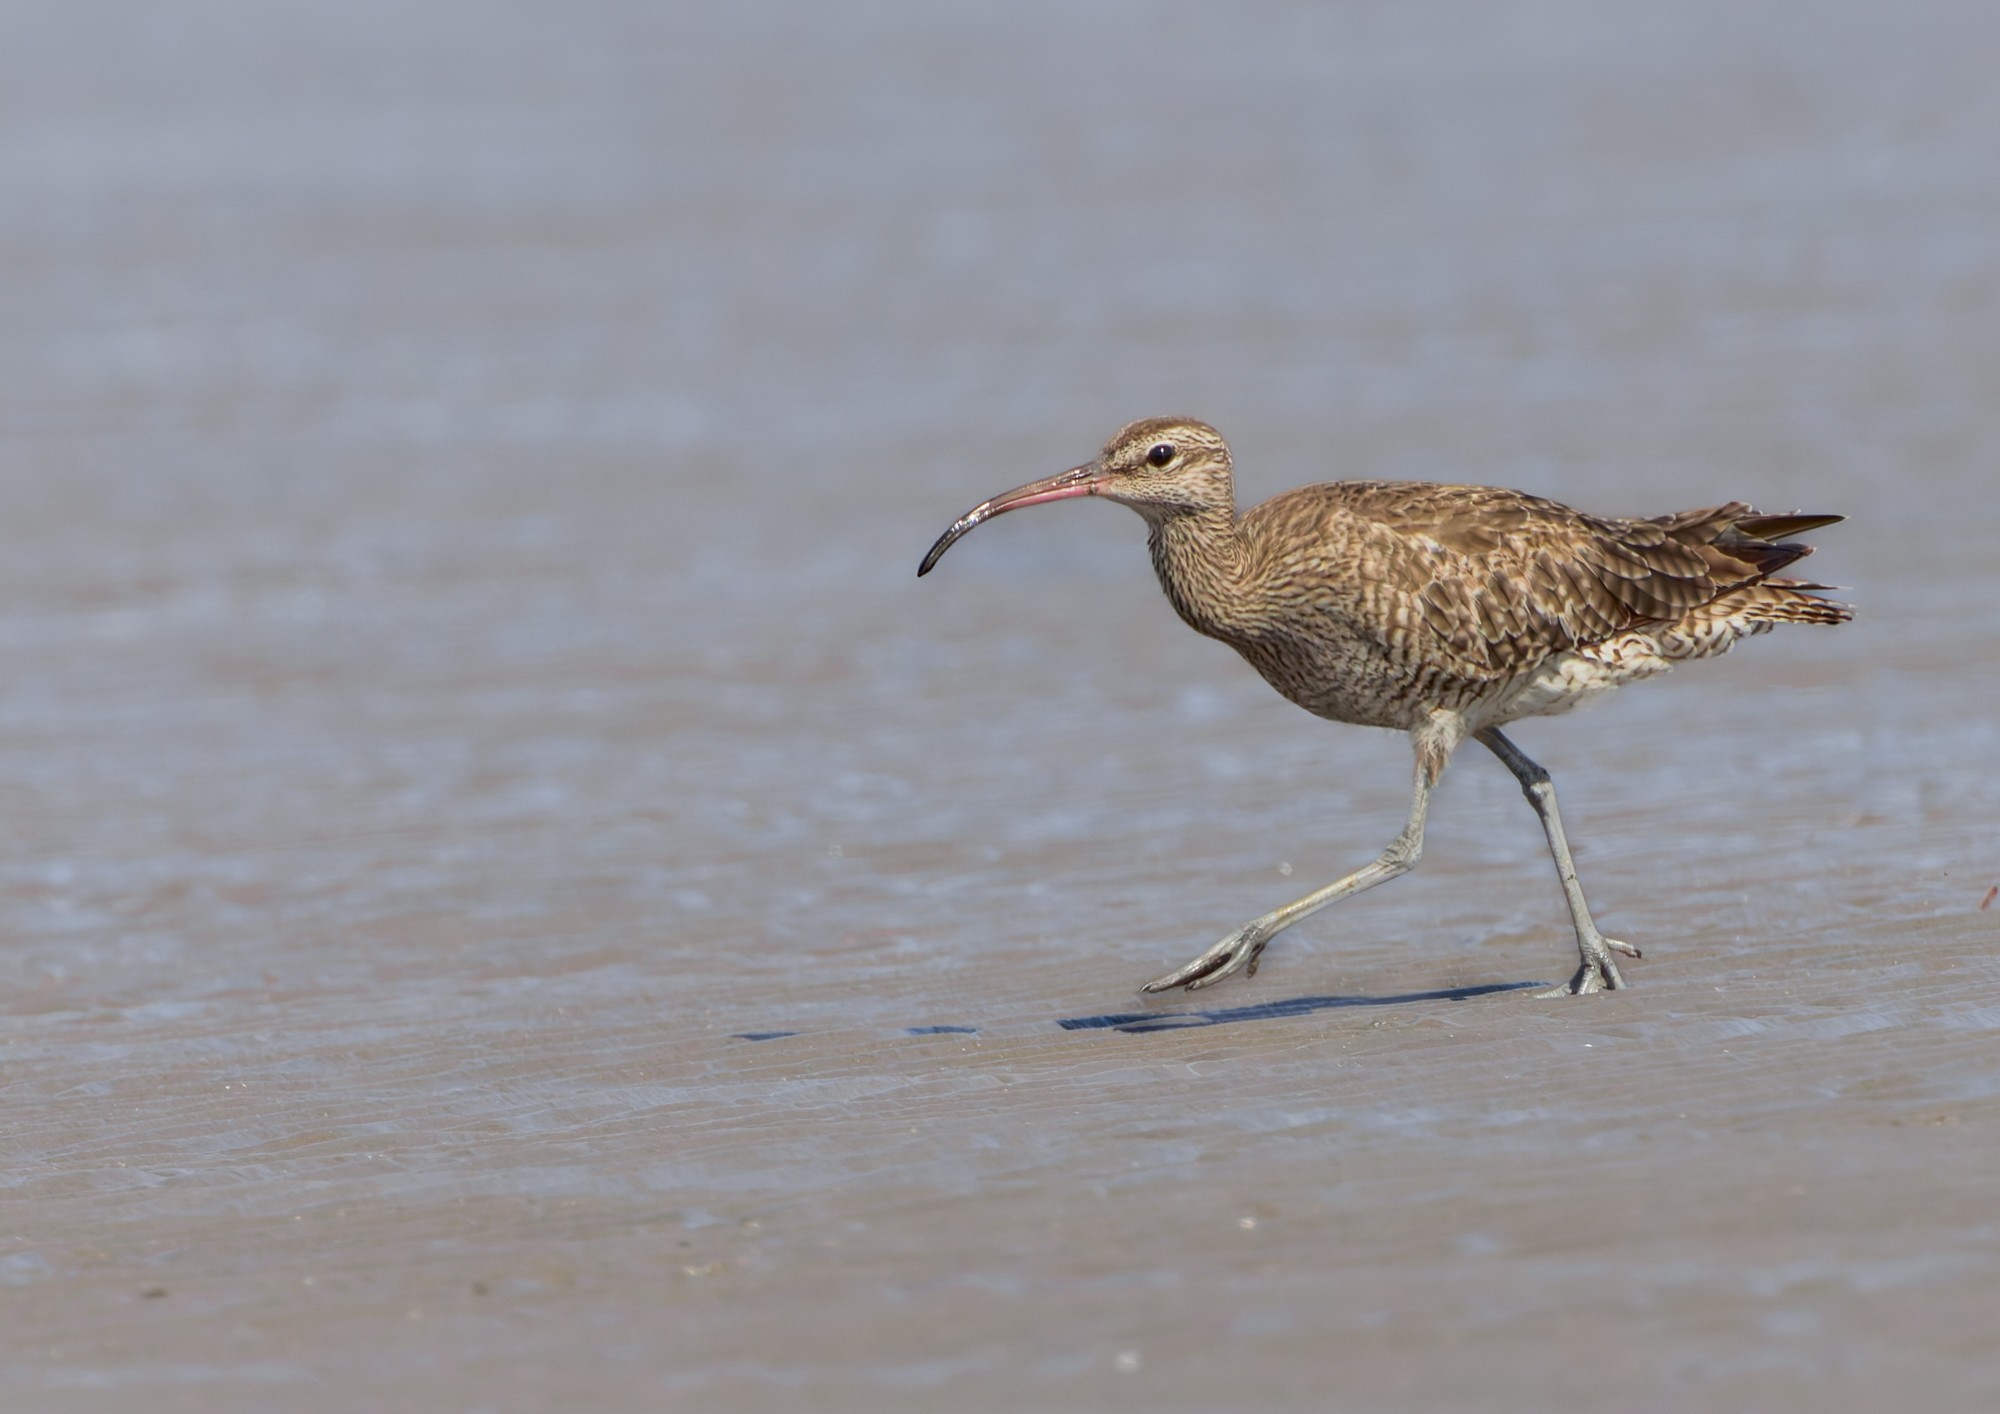 curlew-fe-001-2000px.jpg